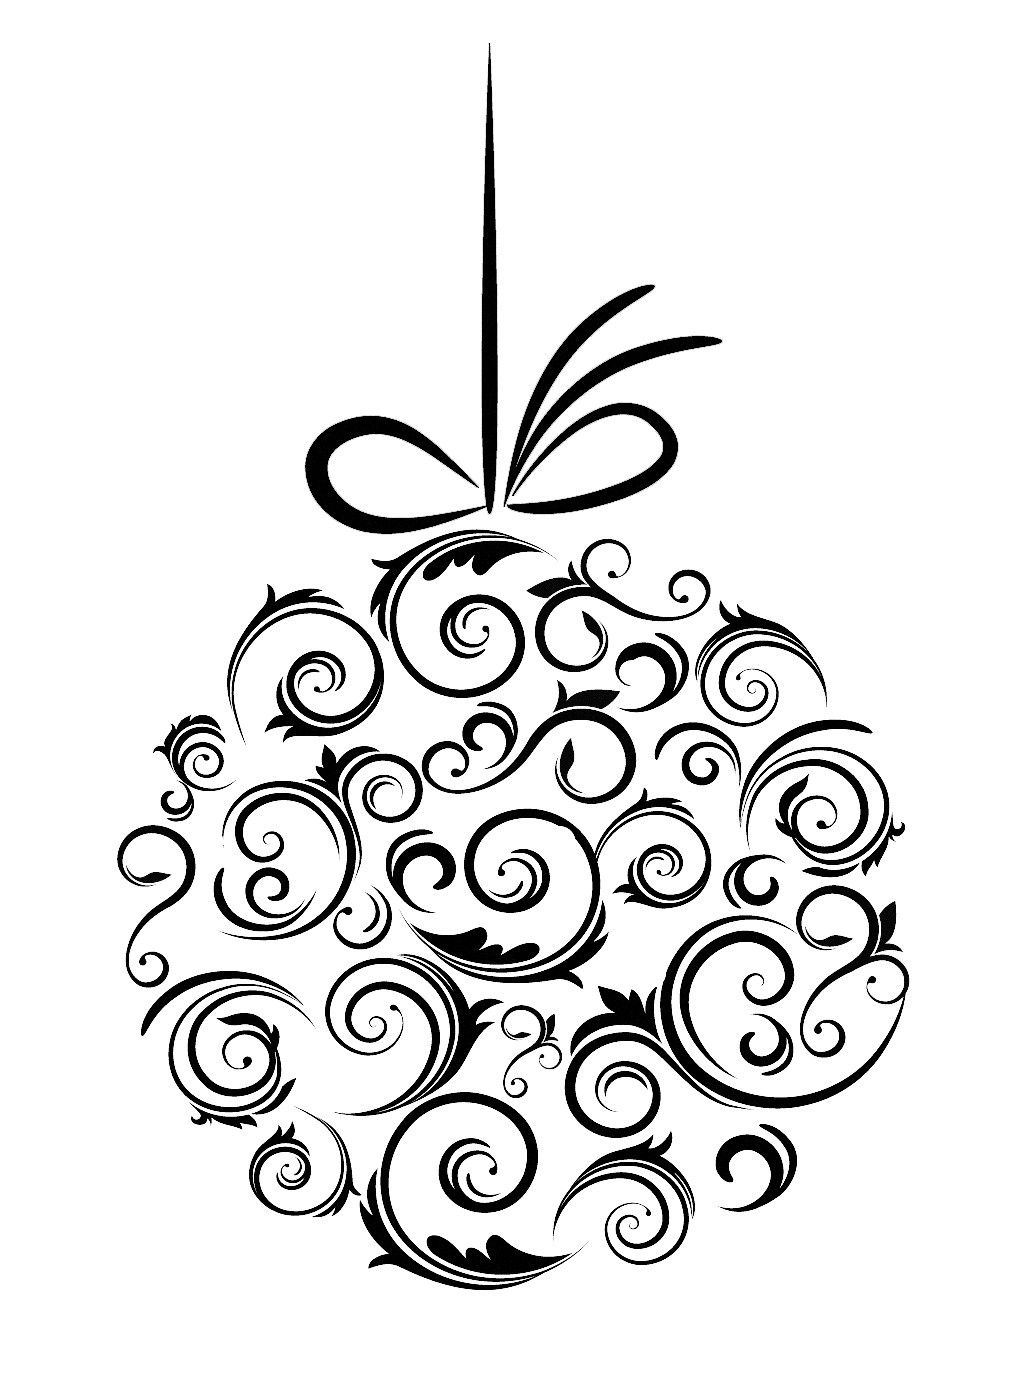 Christmas clipart black and white. Decorations nice 